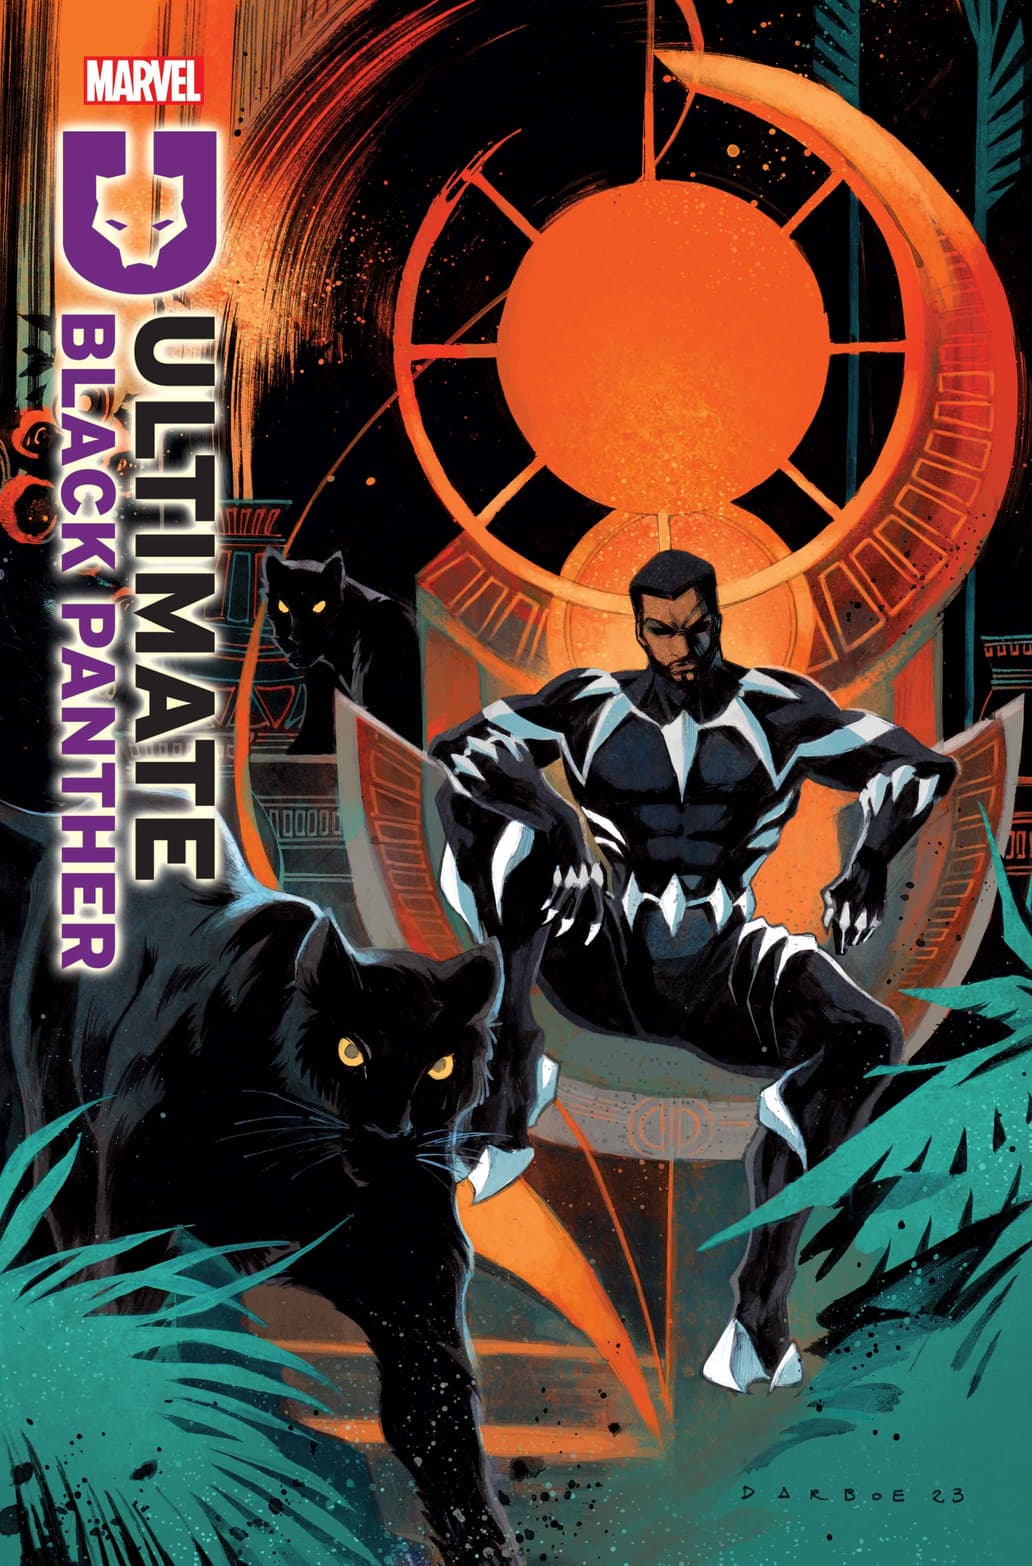 15 Most Powerful Variants Of Black Panther In Marvel Comics